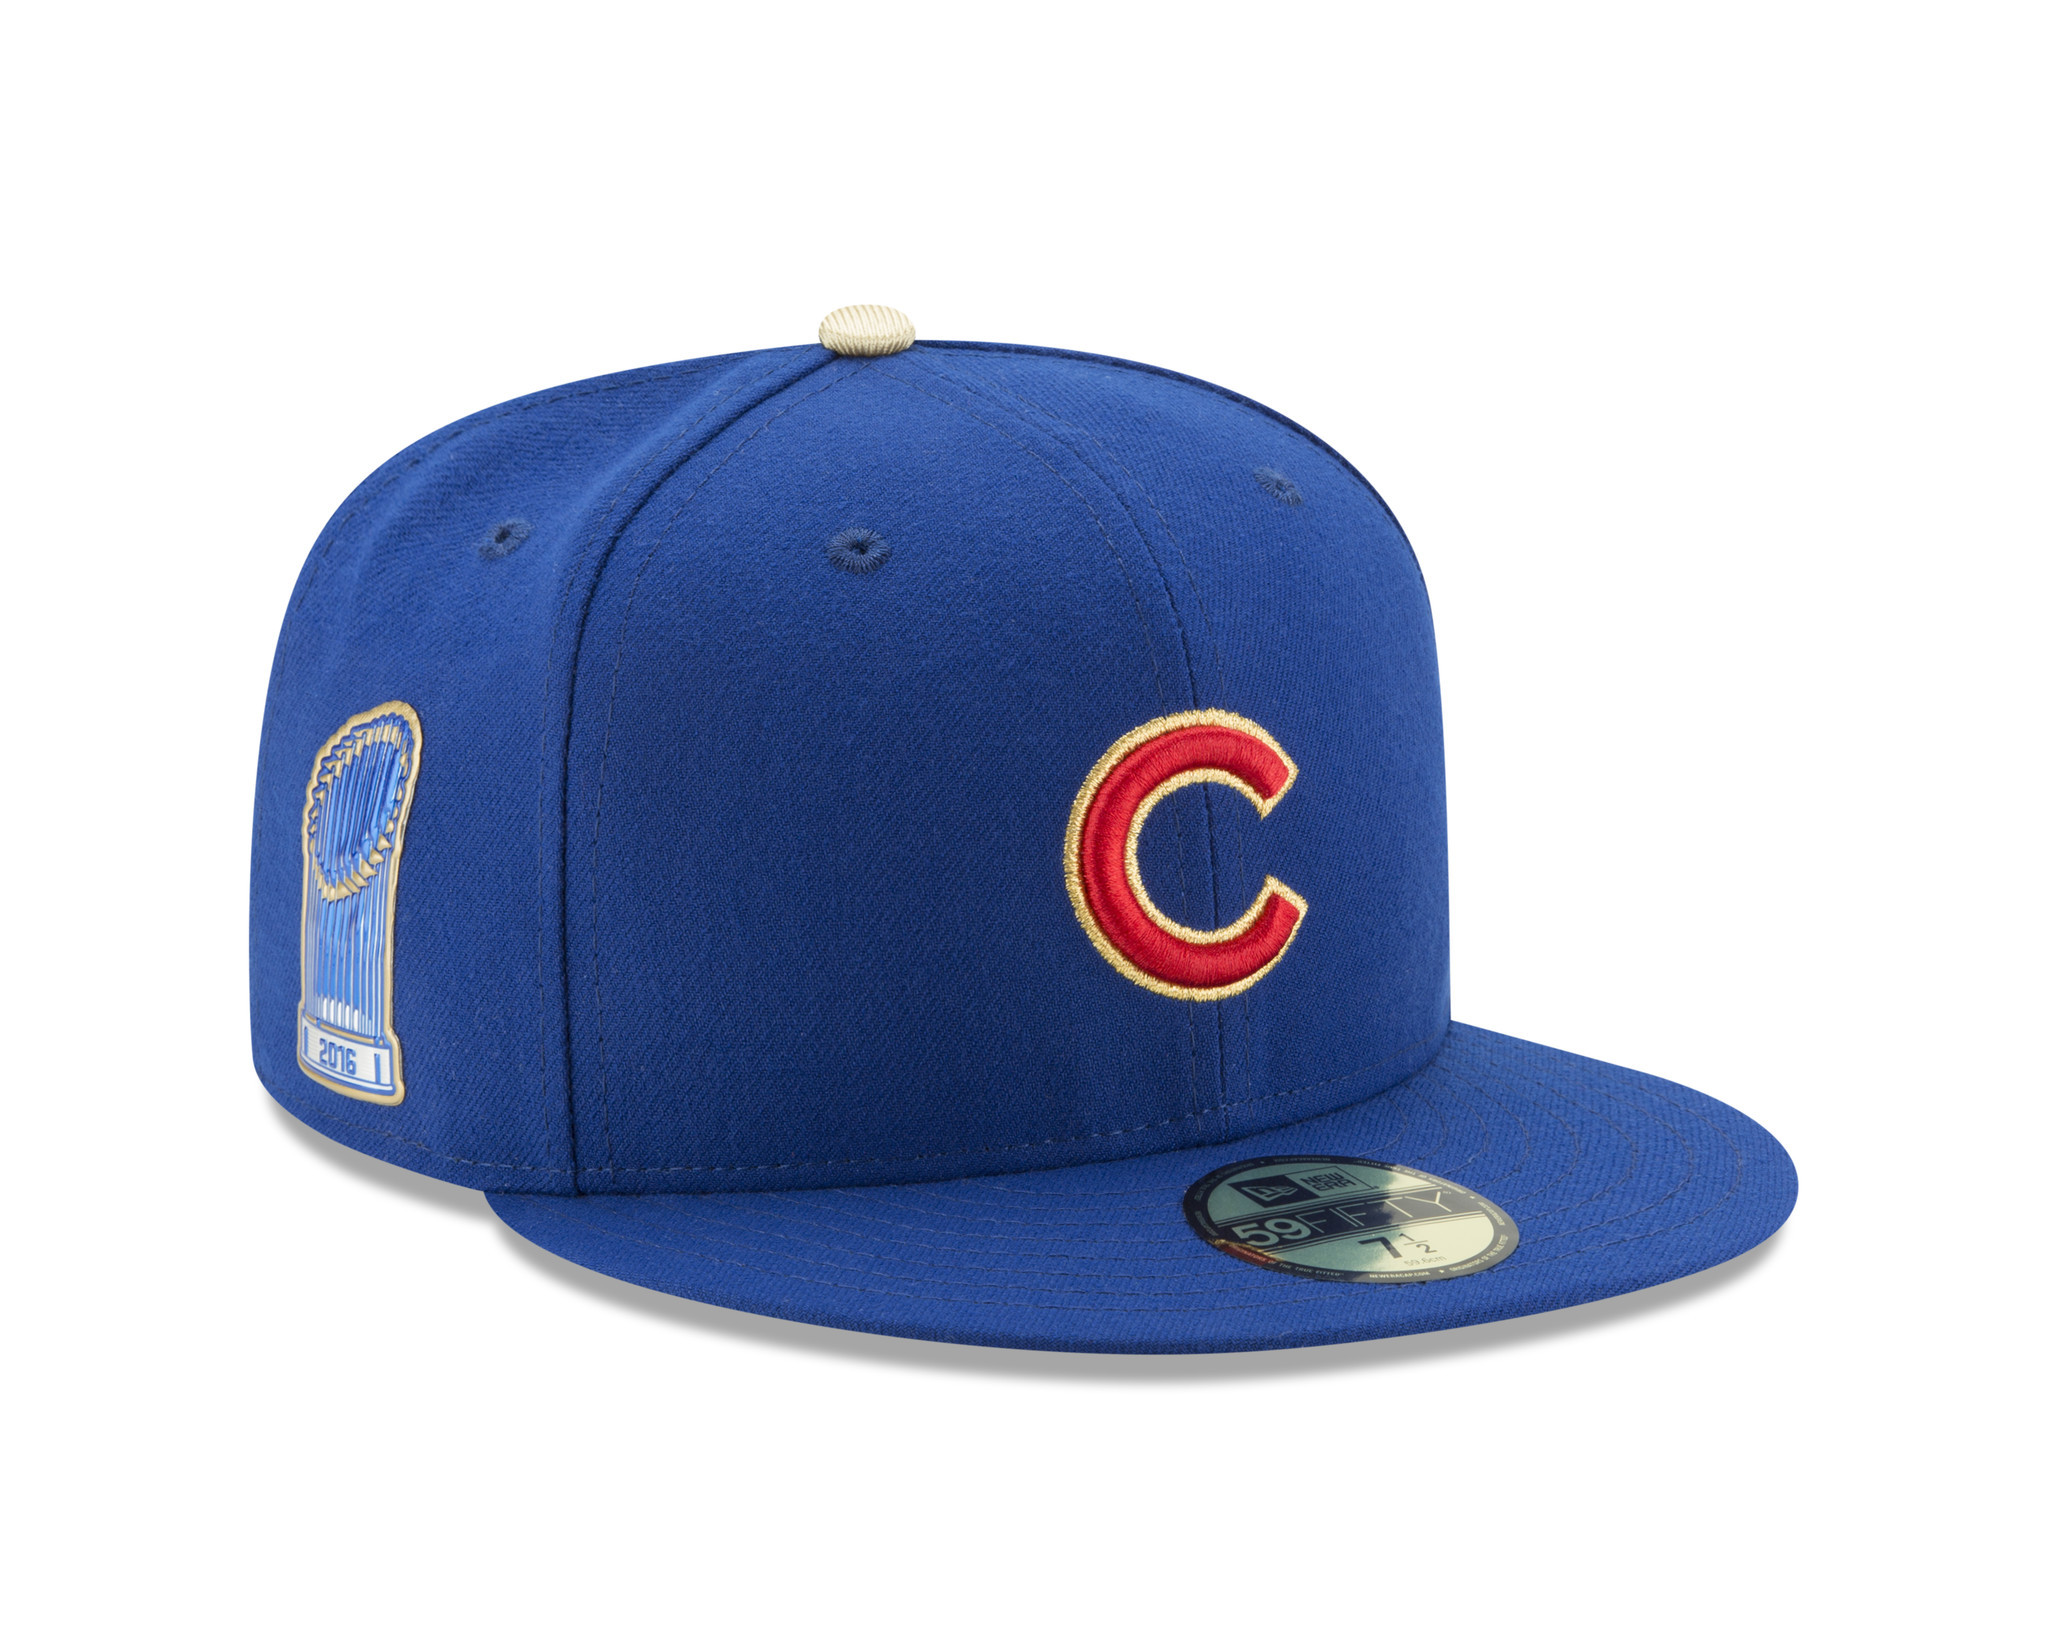 Cubs' uniforms get golden touch to commemorate 2016 World Series title - Chicago Tribune